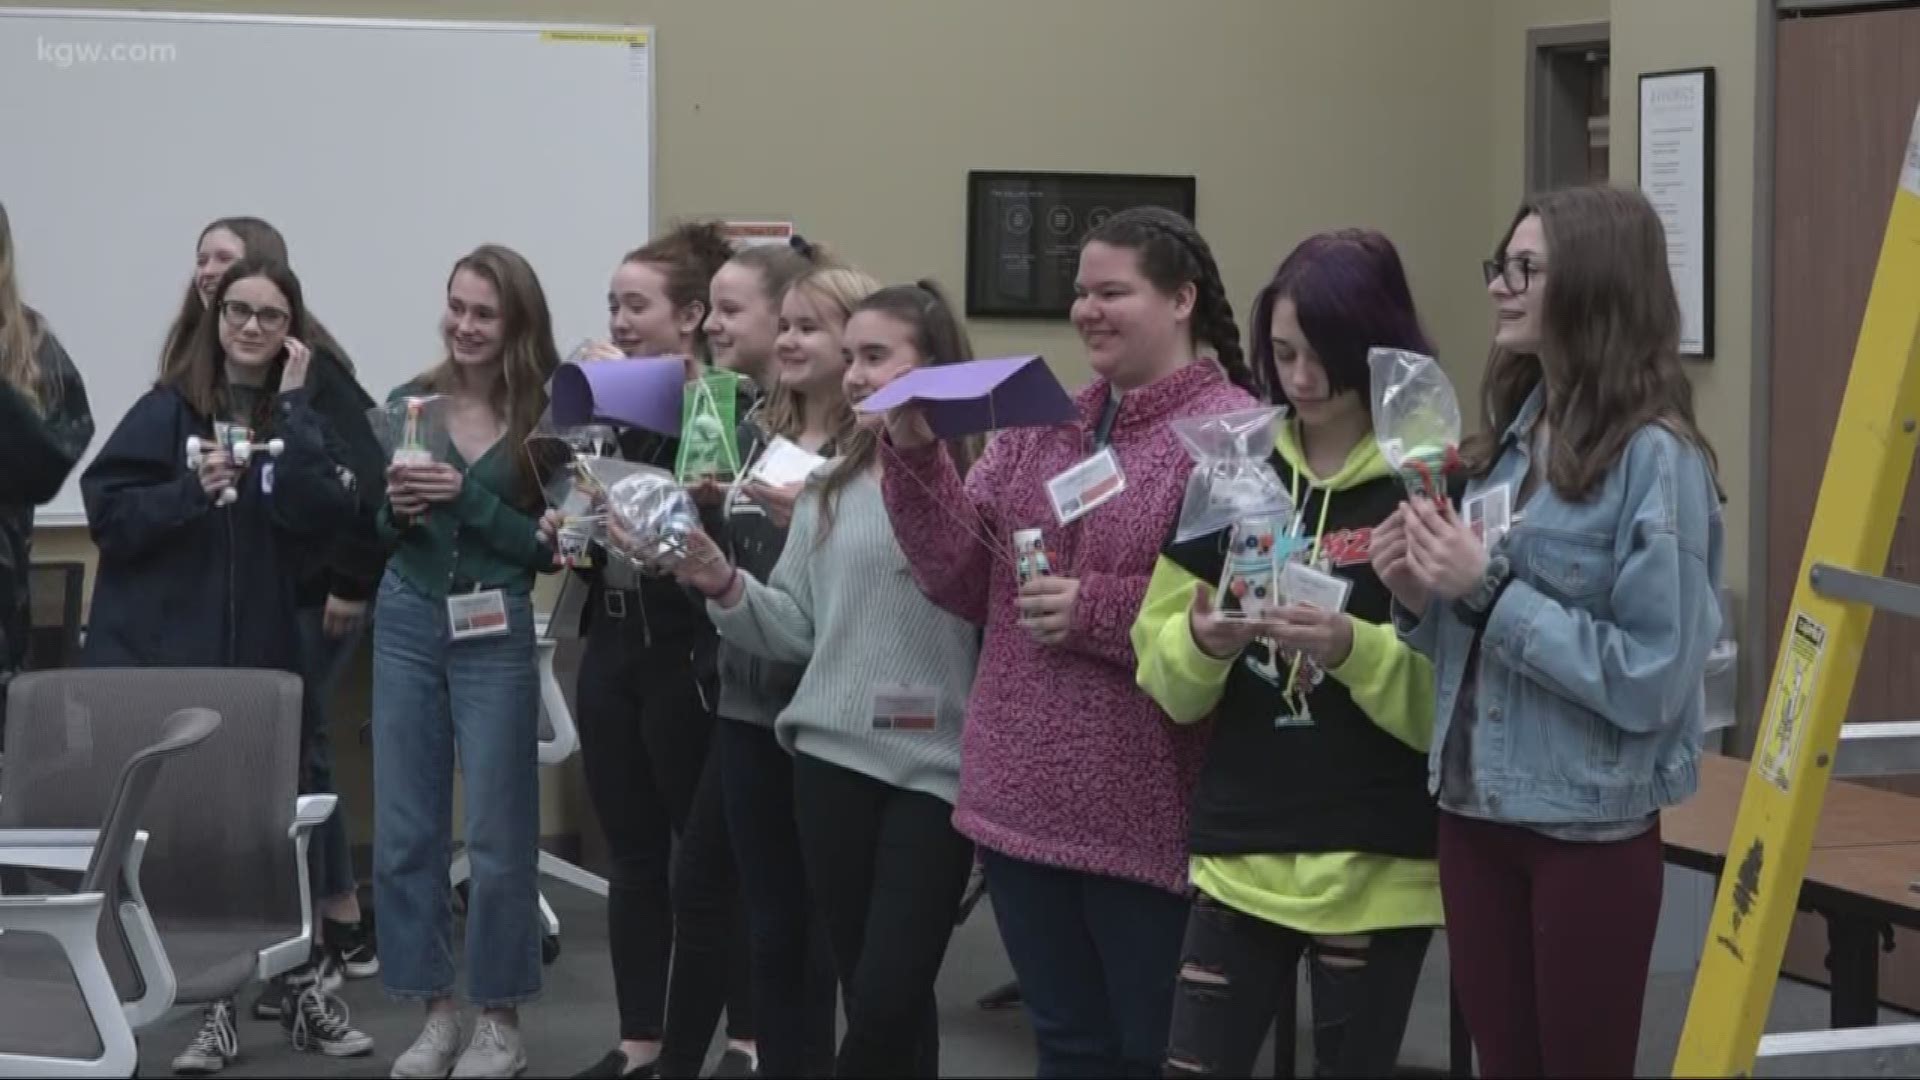 The engineers of the future. We take you to an event encouraging girls to become engineers.